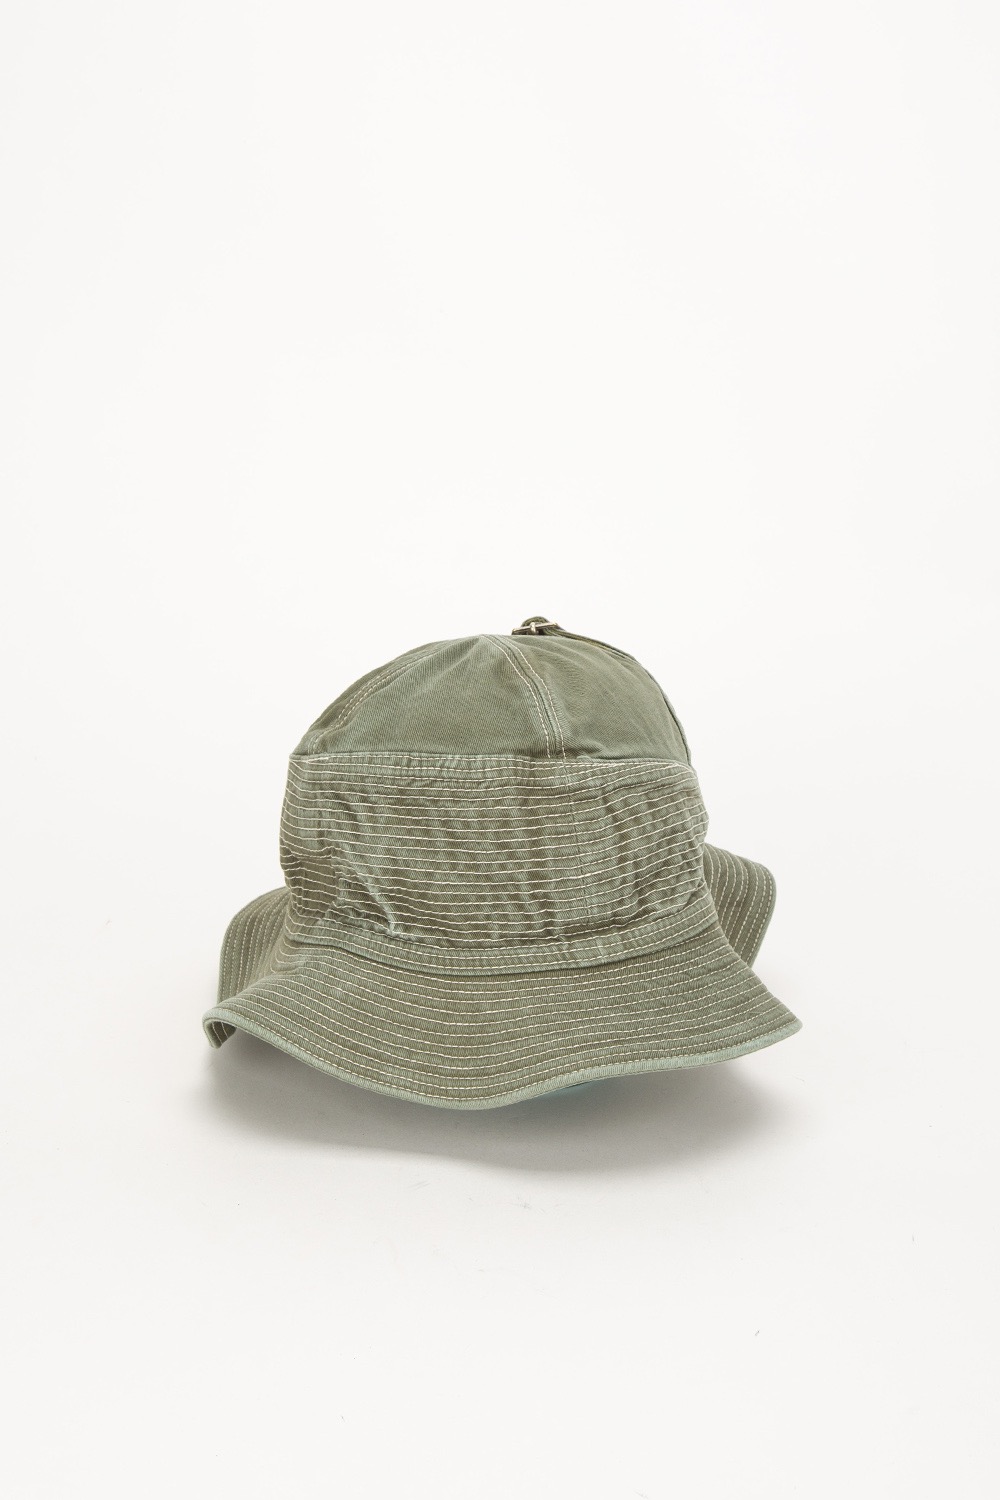 (22FW) (EK-1101) CHINO THE OLD MAN AND THE SEA HAT KHAKI